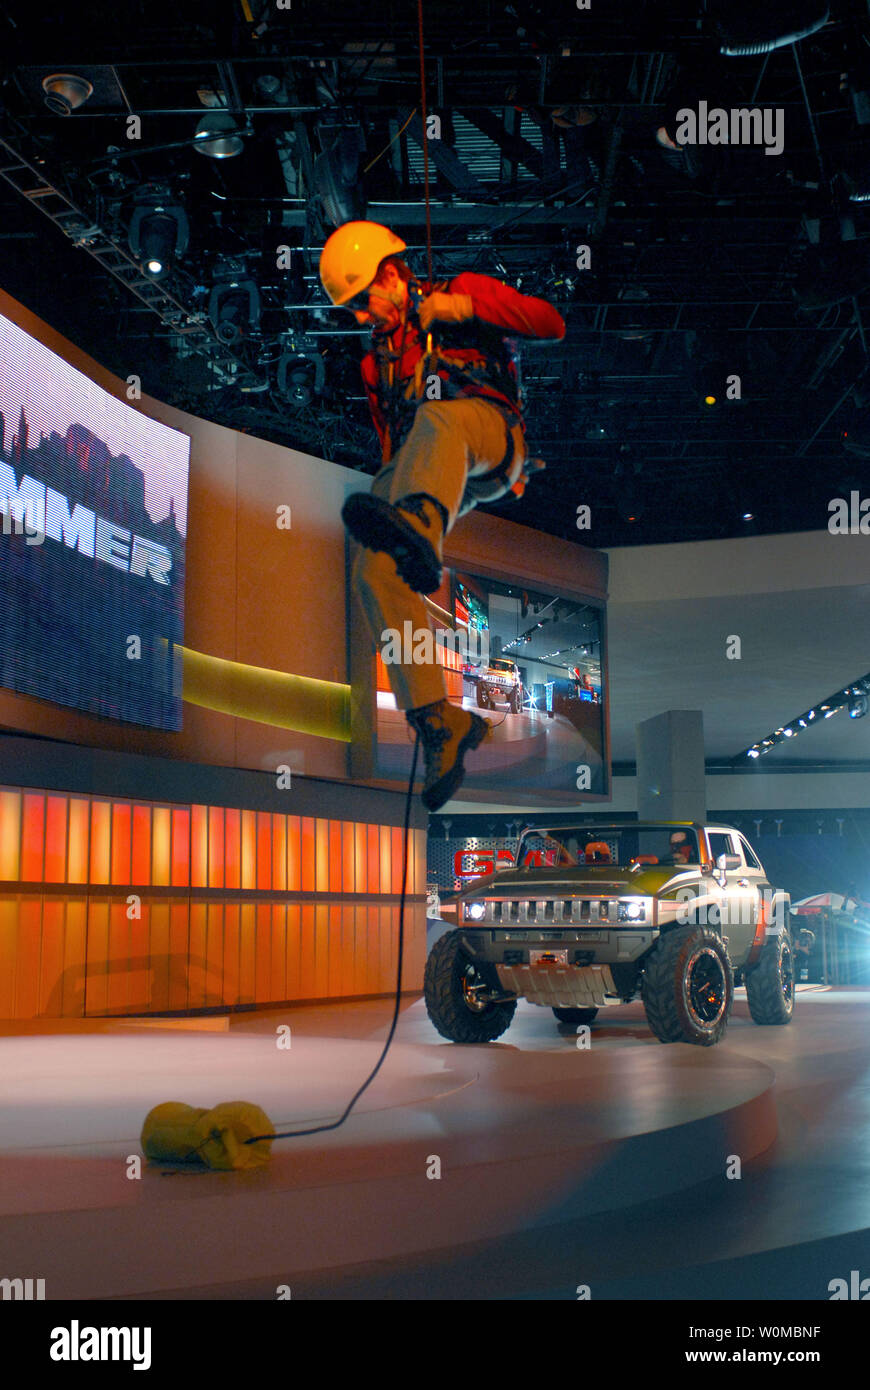 A rappeller drops from the rafters as part of the HUMMER HX Concept world introduction at the 2008 North American International Auto Show on in Detroit, Michigan on January 13, 2008. The HUMMER HX Concept is an open-air, two-door off-road vehicle that runs on E85 ethanol fuel. (UPI Photo/Steve Fecht/General Motors) Stock Photo